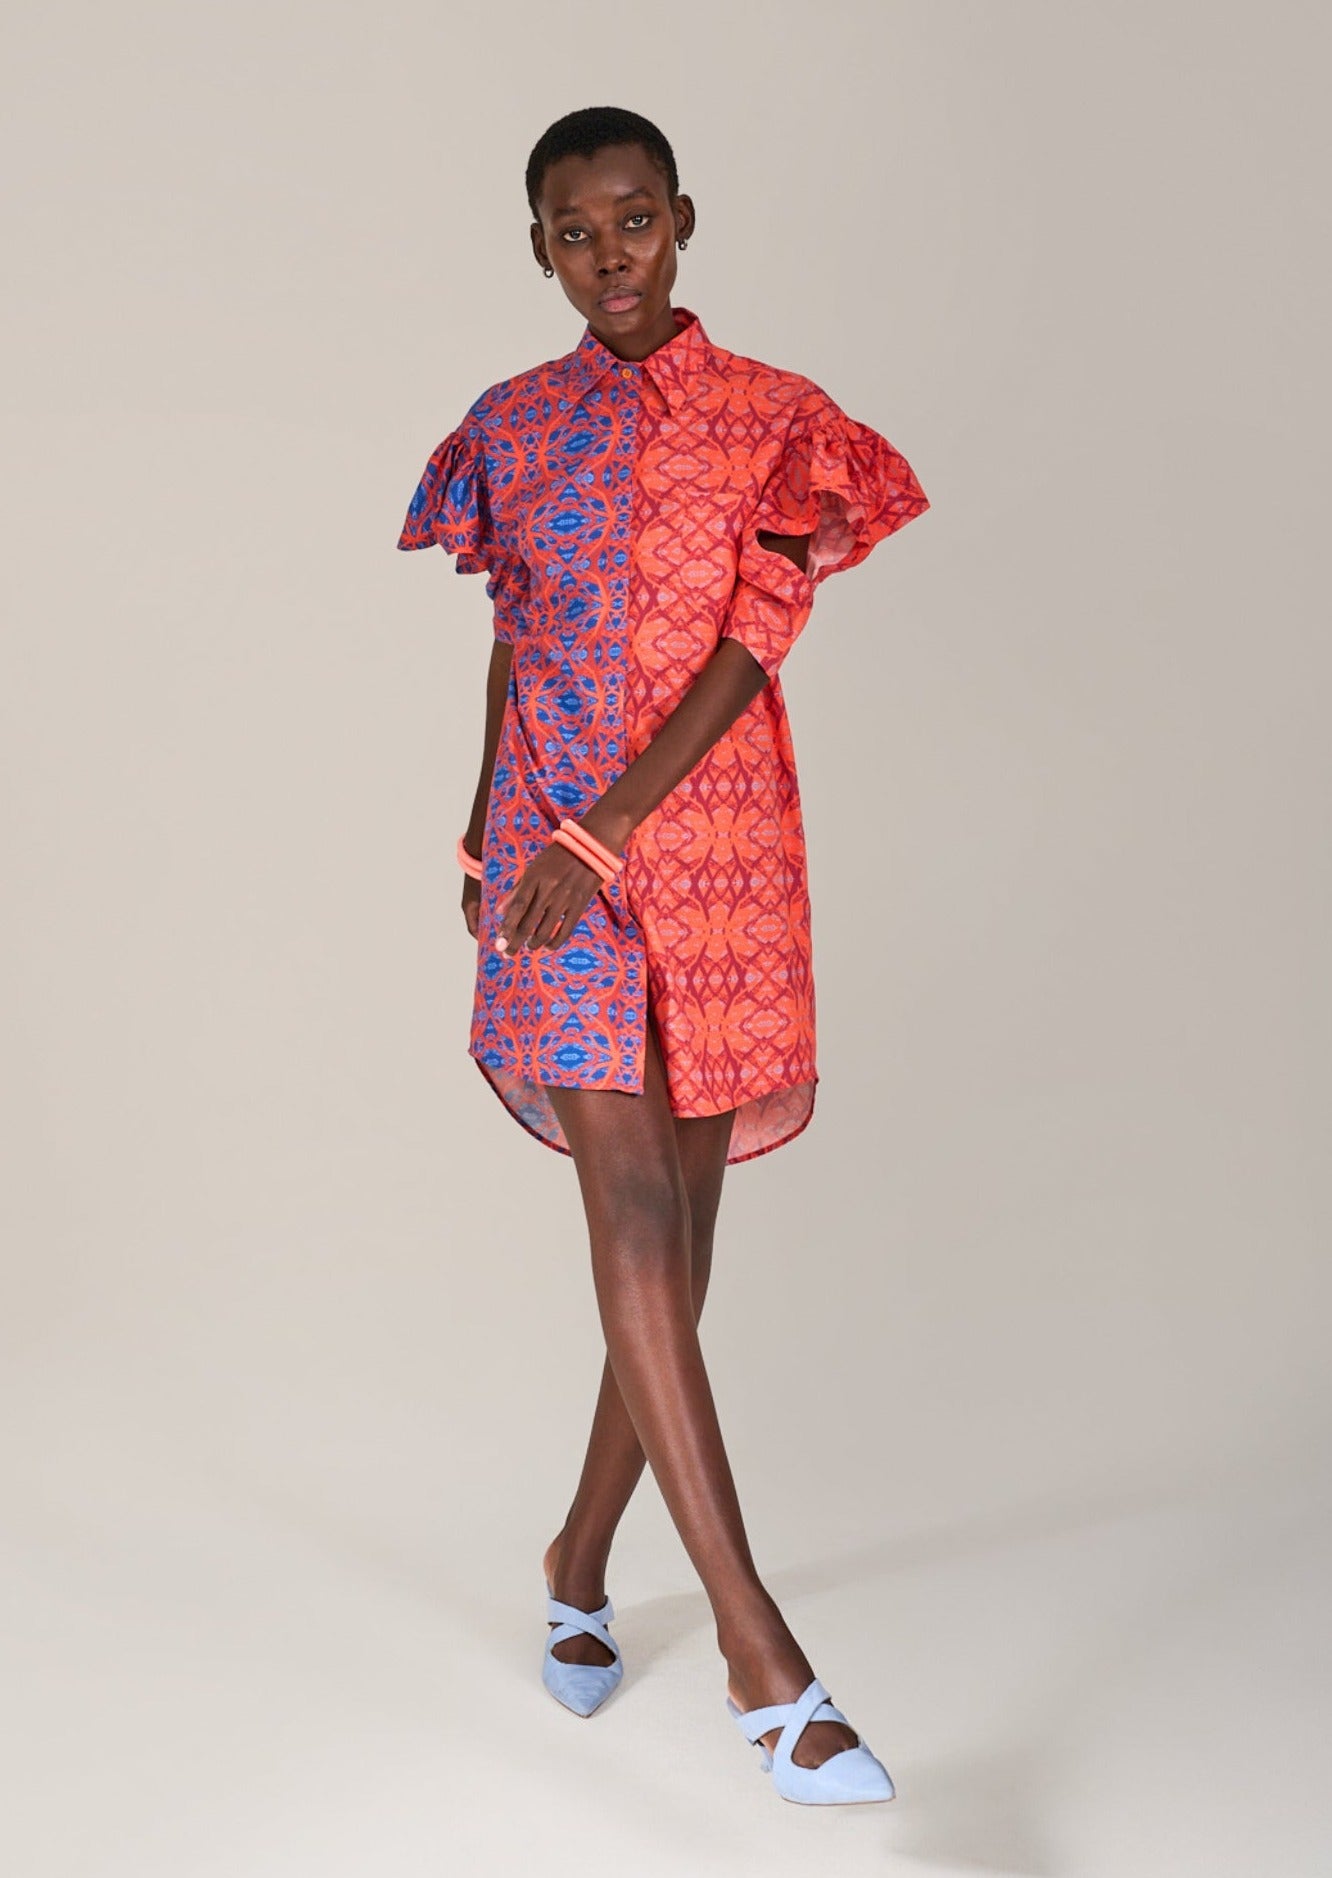 Model standing with crossed legs in the KAHINDO Chinchilla Shirtdress